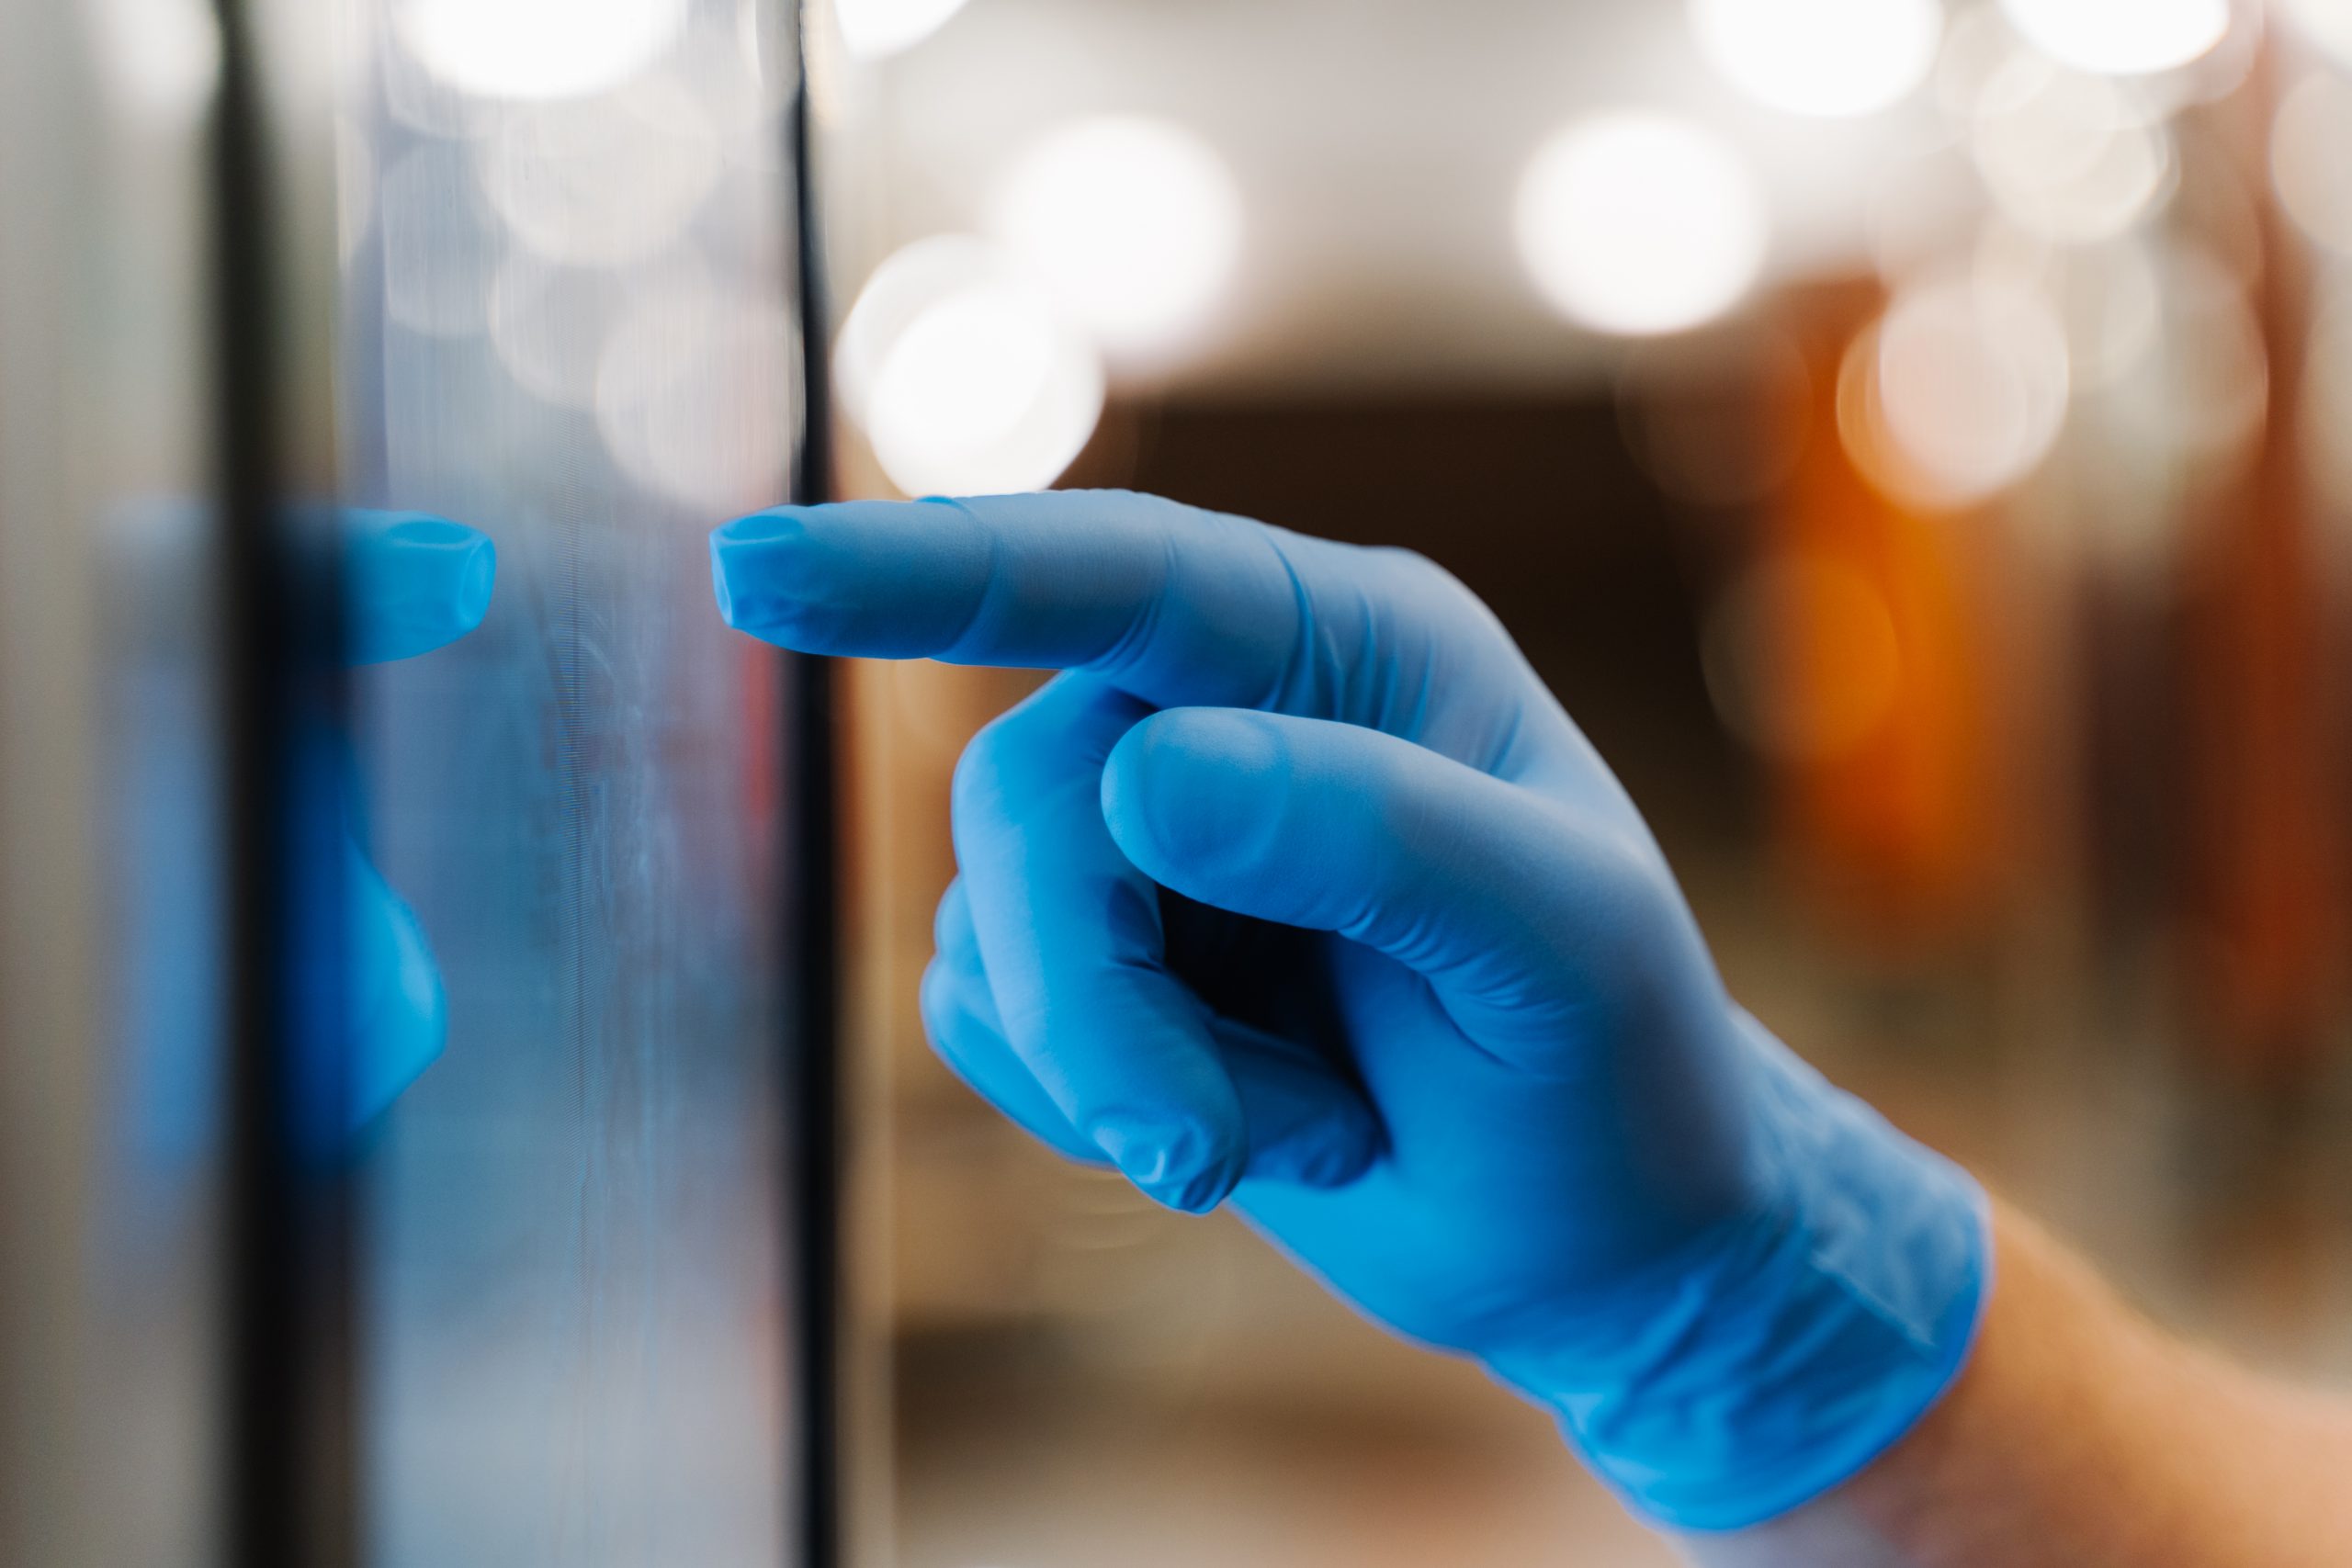 Gloved Touch Medical LCDs (Projective Capacitive)